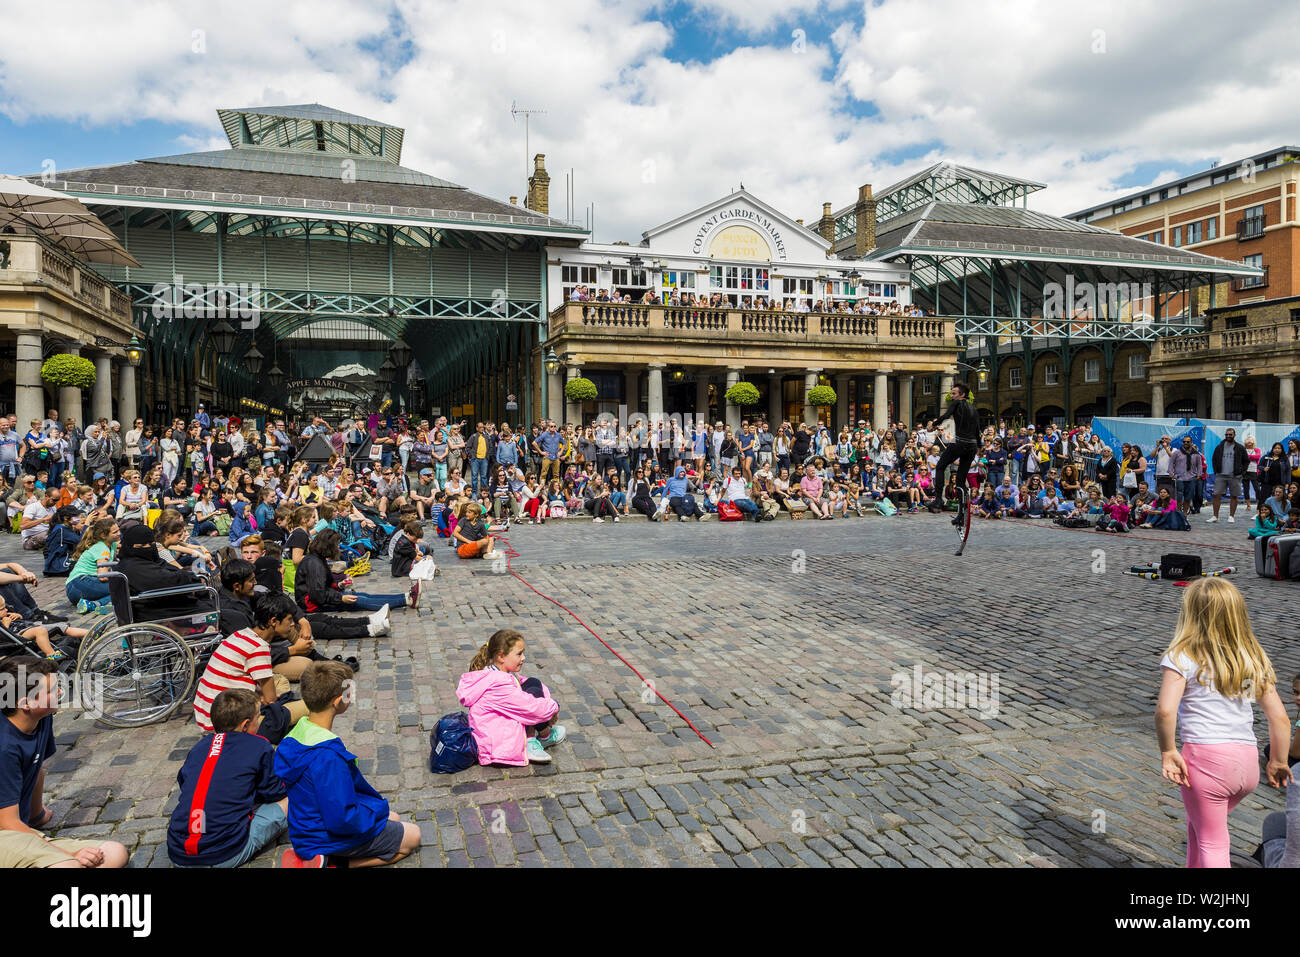 A street performer entertains crowds of tourists at Covent Garden Market, London Stock Photo